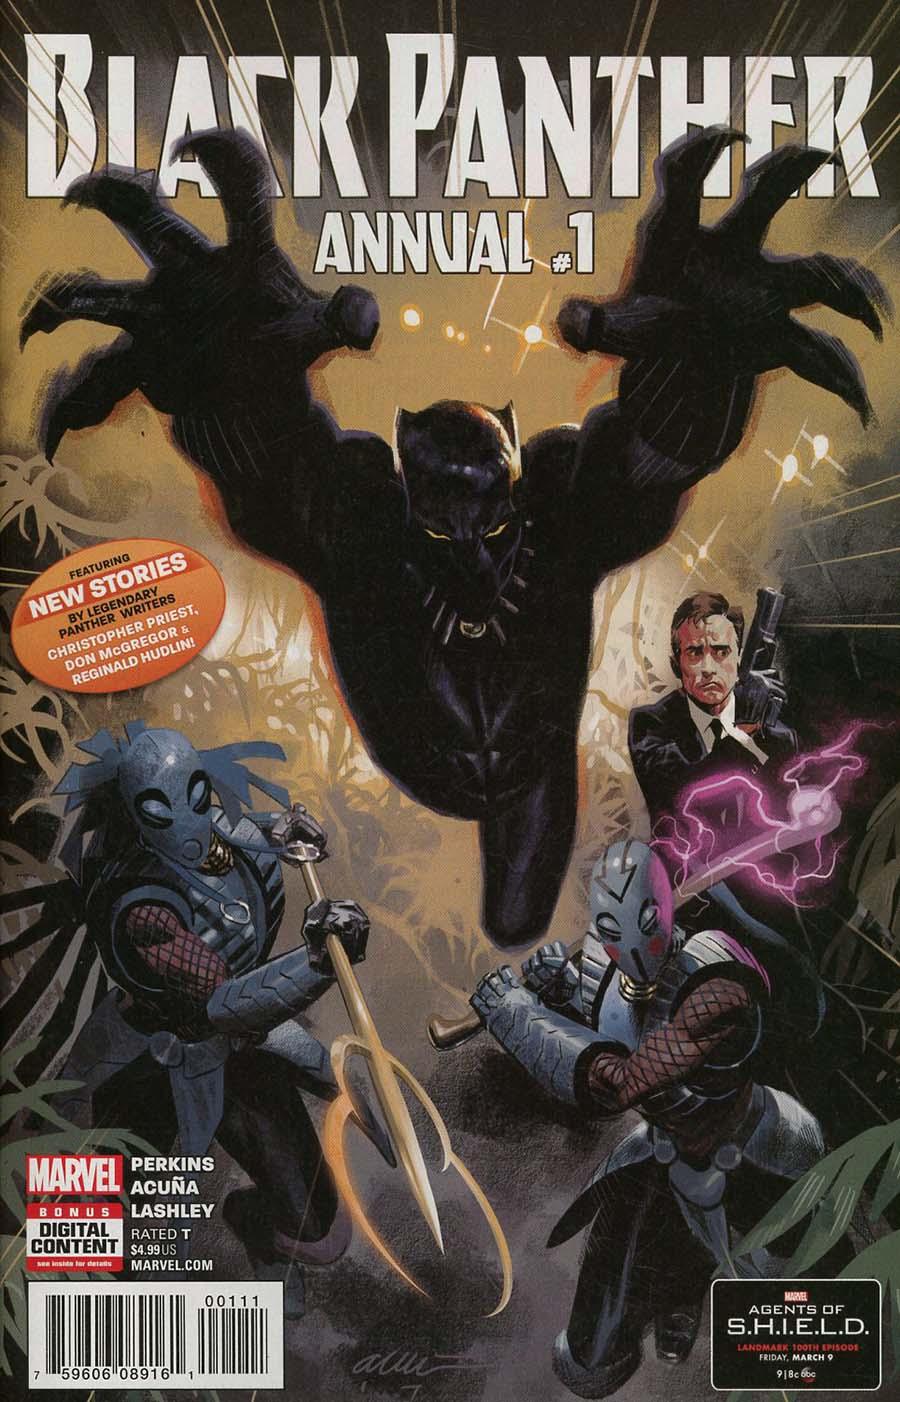 Black Panther Vol. 6 Annual #1